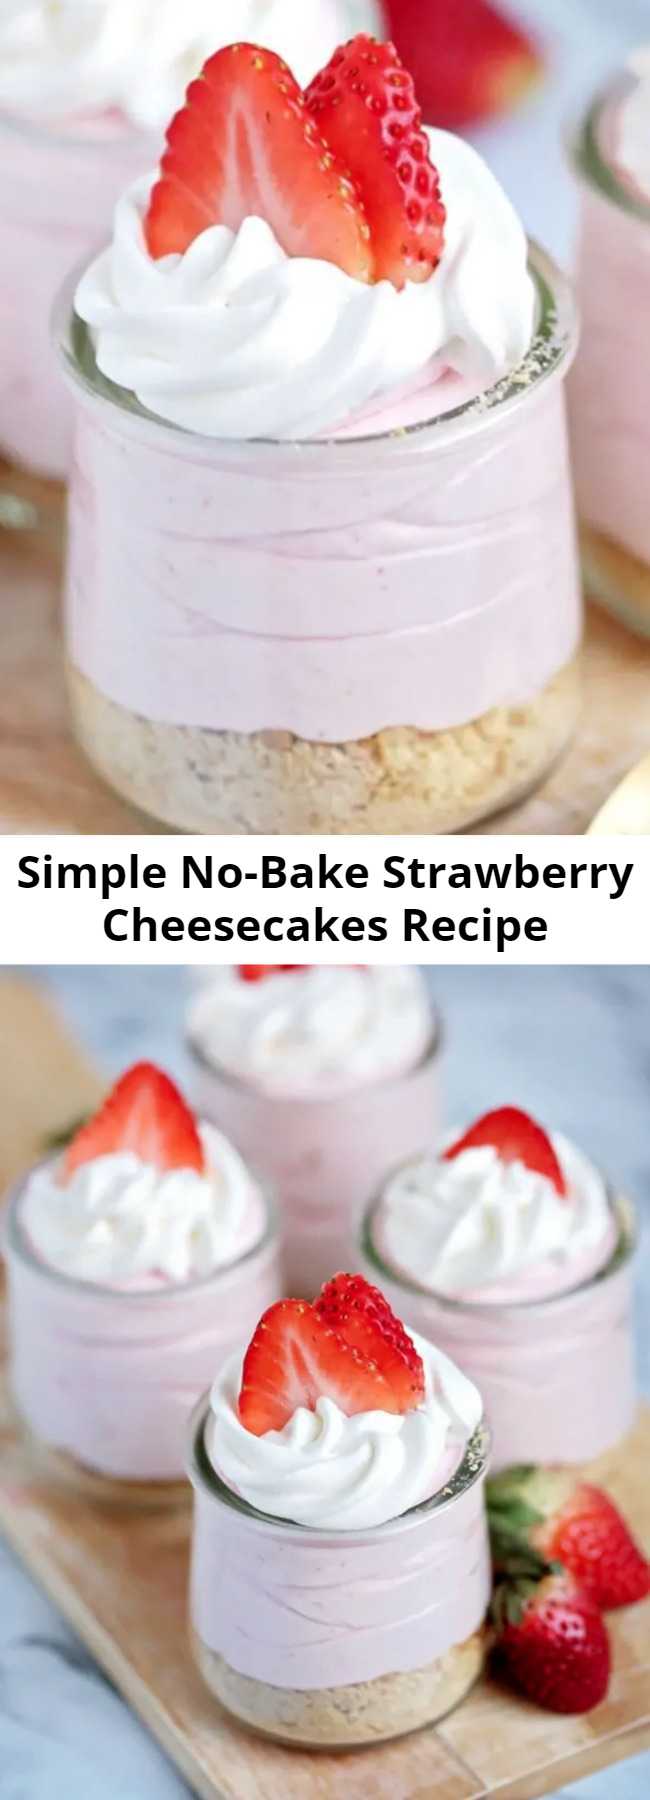 Simple No-Bake Strawberry Cheesecakes Recipe - A super simple recipe for No Bake Strawberry Cheesecakes using fresh or frozen strawberries. The perfect no-bake dessert for summer entertaining – or a fun recipe for the kids to help make!